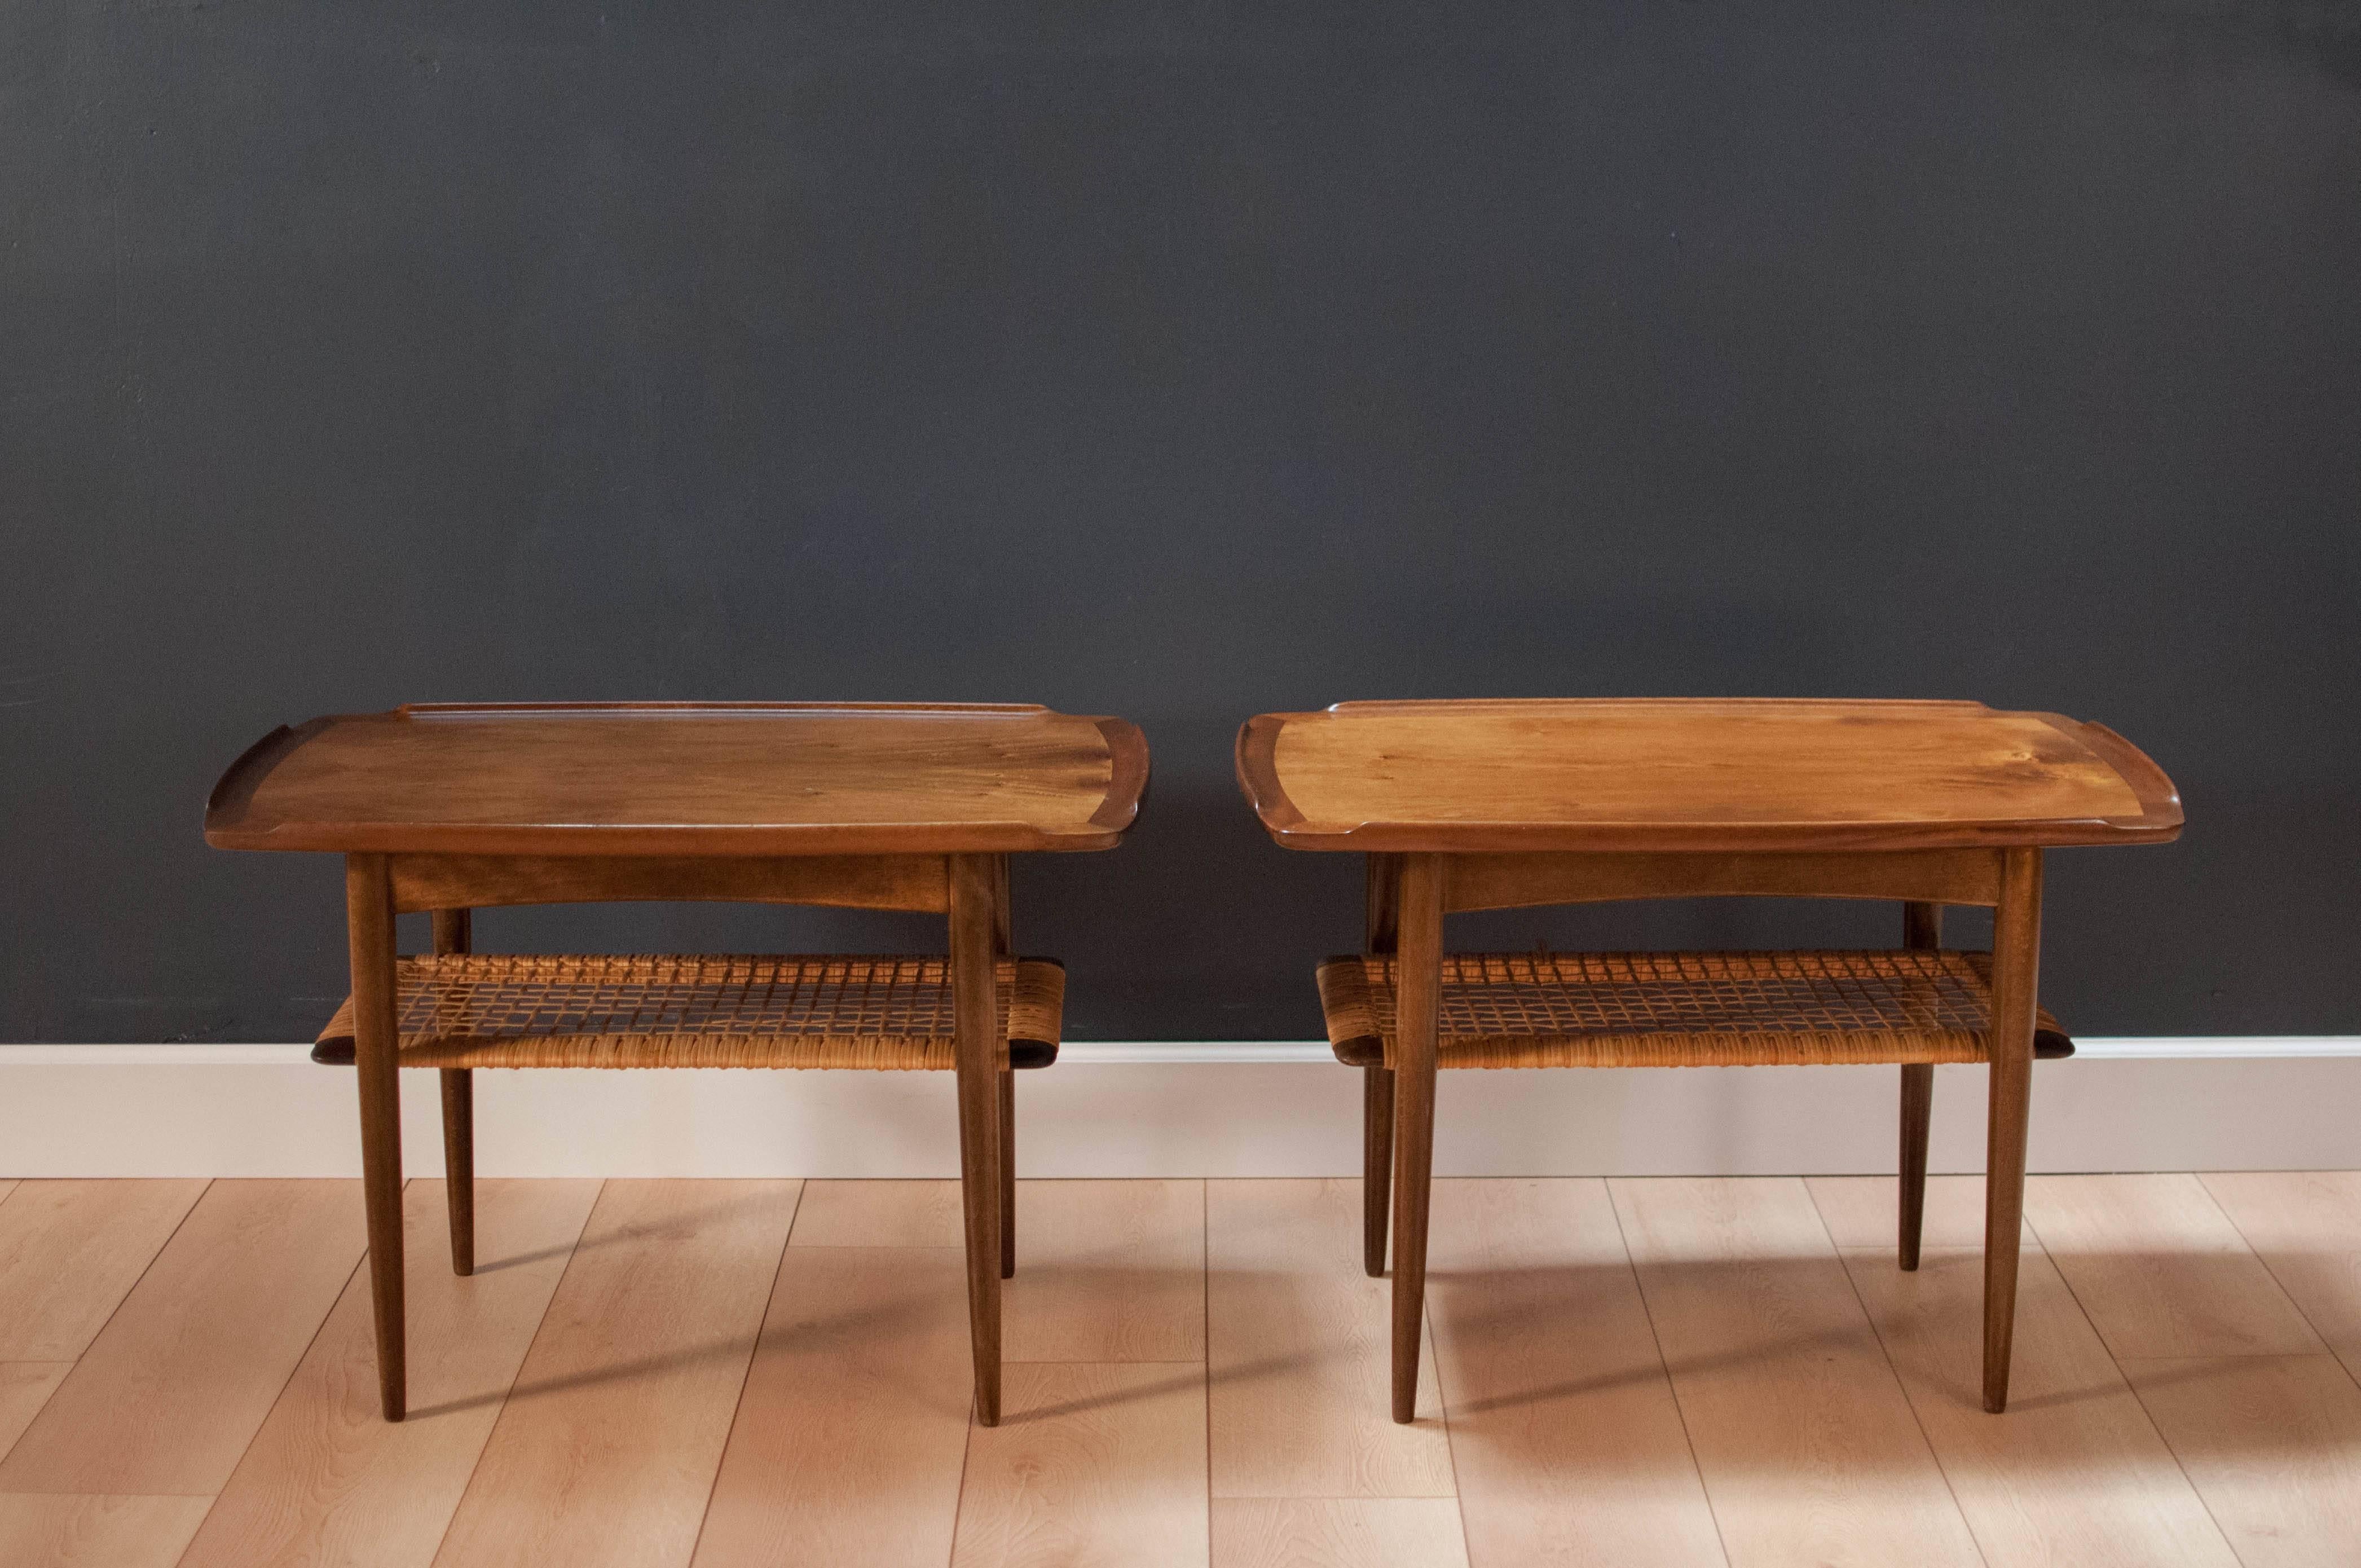 Danish pair of side tables designed by Poul Jensen for Selig. This set is made of walnut and displays sculpted raised edges with a two-tier magazine shelf made of cane. Price is for the pair. 

